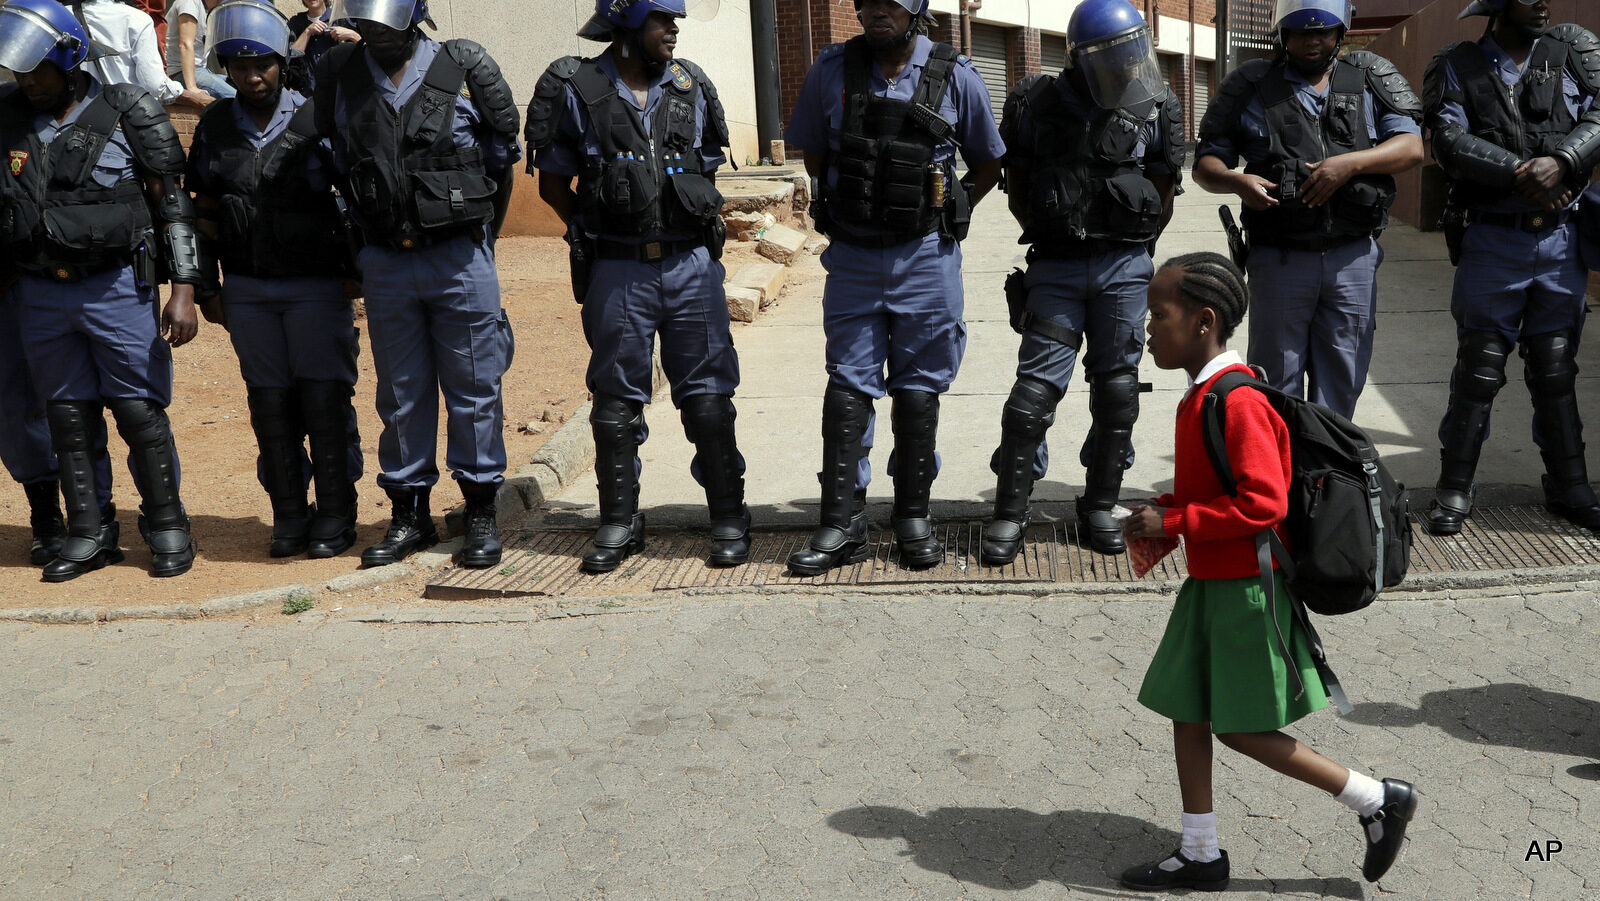 A young girl wearing school uniform, walks past riot police officers as they guard students from the University of the Witswatersrand outside the Hillbrow Magistrate’s Court in Johannesburg, South Africa, Wednesday, Oct. 12, 2016, protesting in support of their peers who were arrested earlier this week.